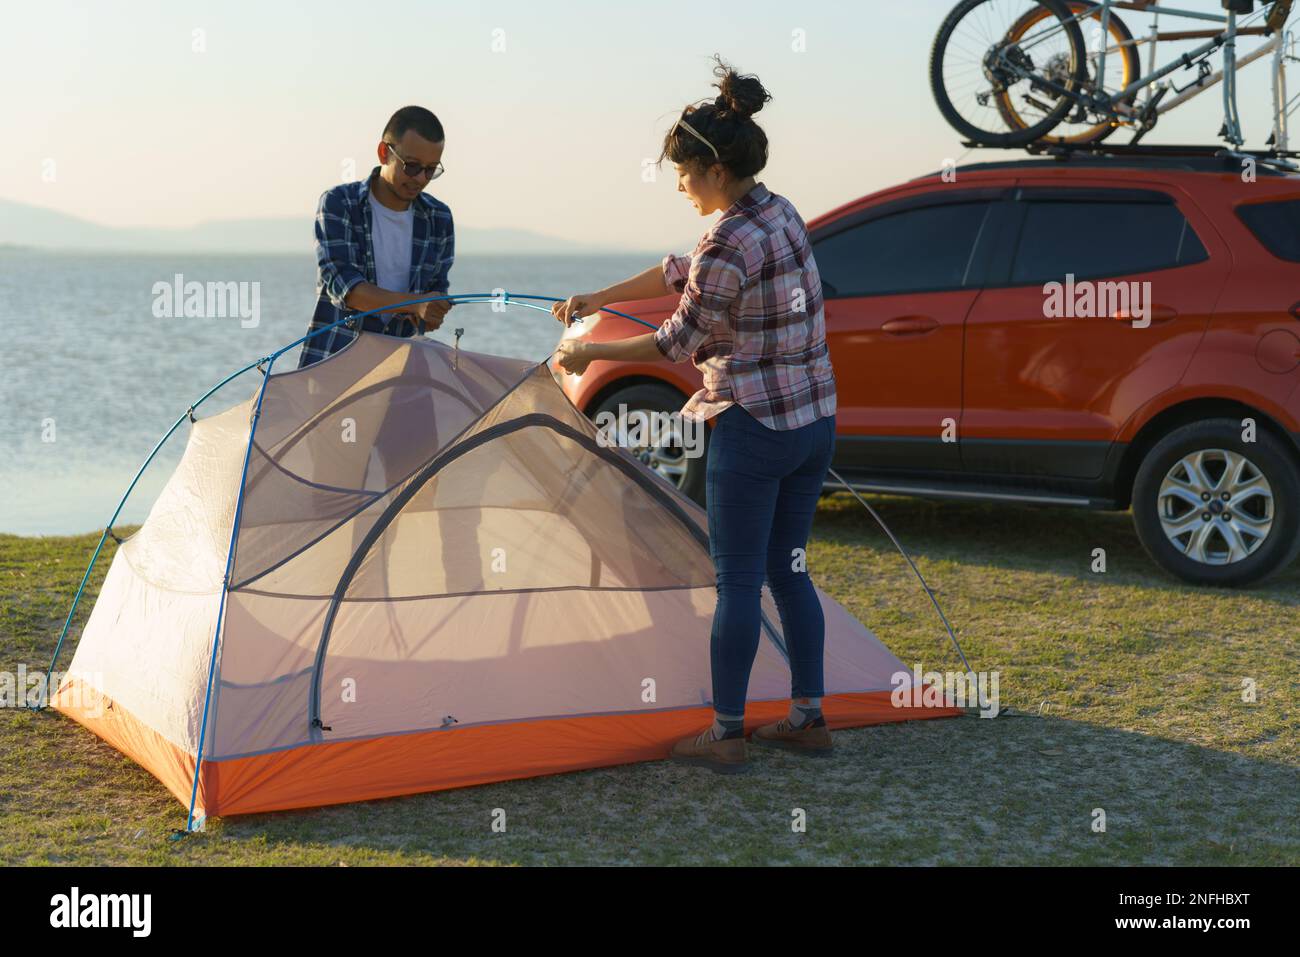 Asian couple preparing a tent to camping in the lawn with the lake in the background during sunset Stock Photo